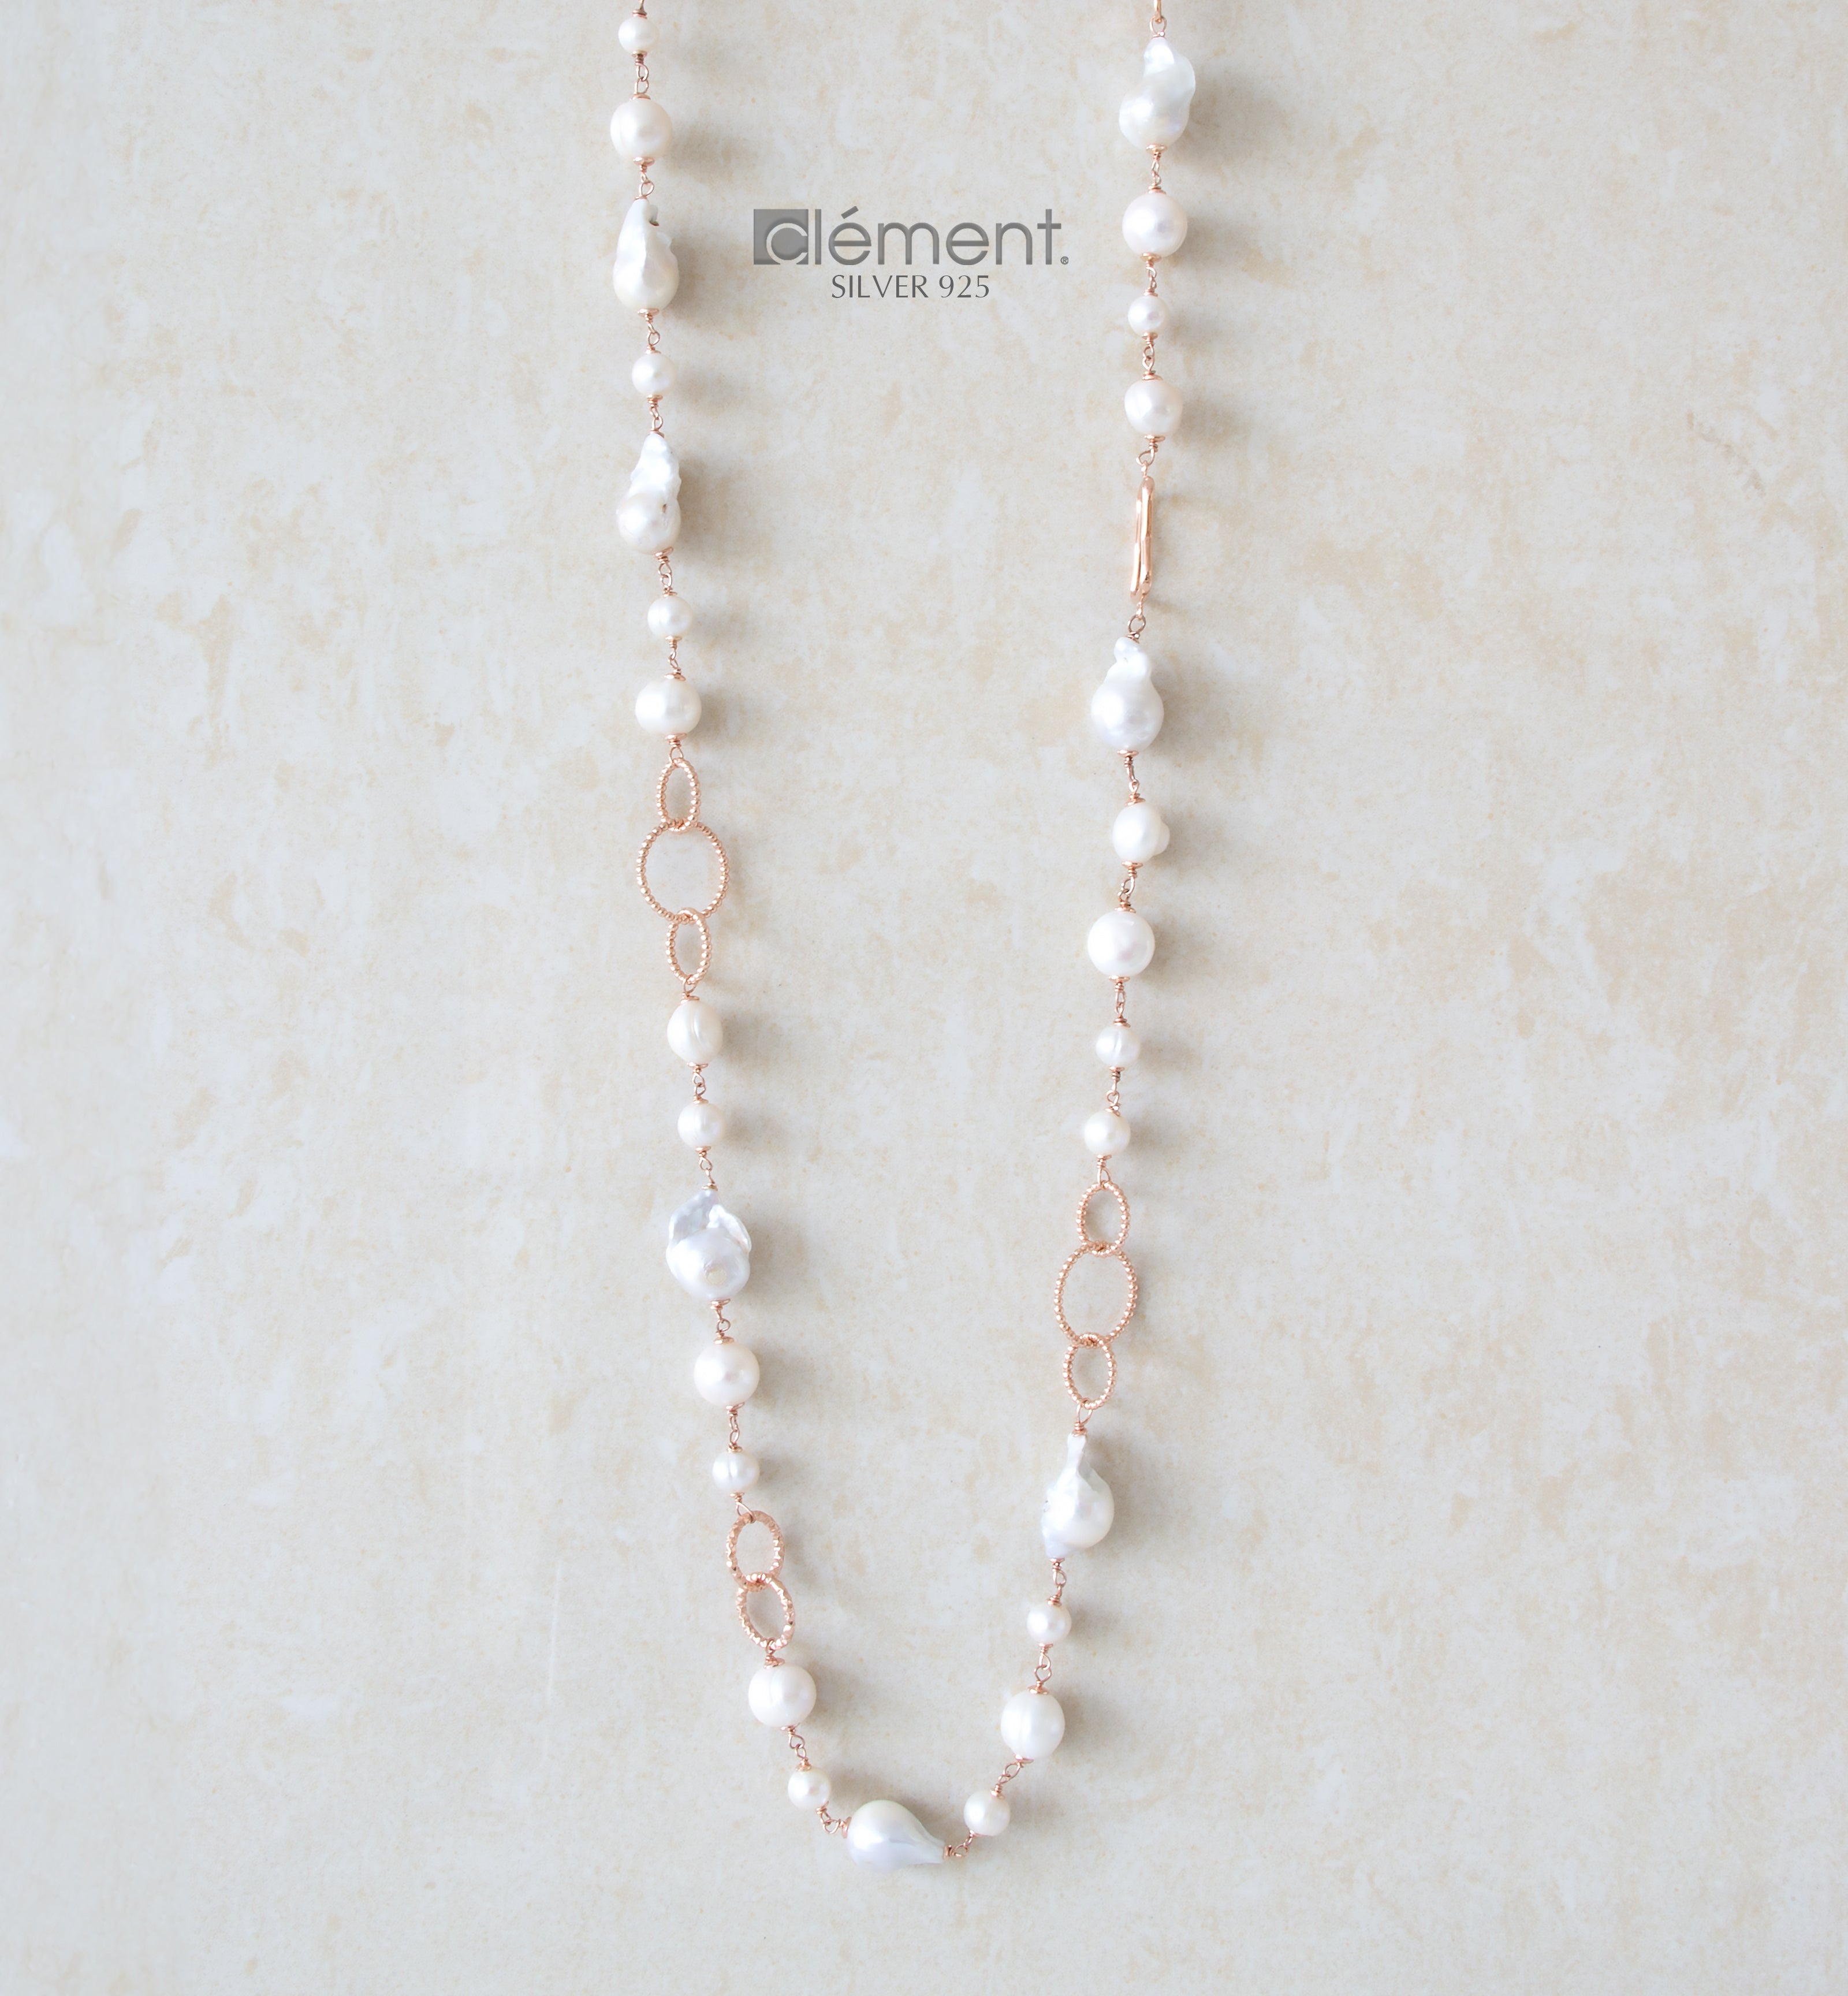 Silver 925 Long Necklace with FW Cultured Pearl